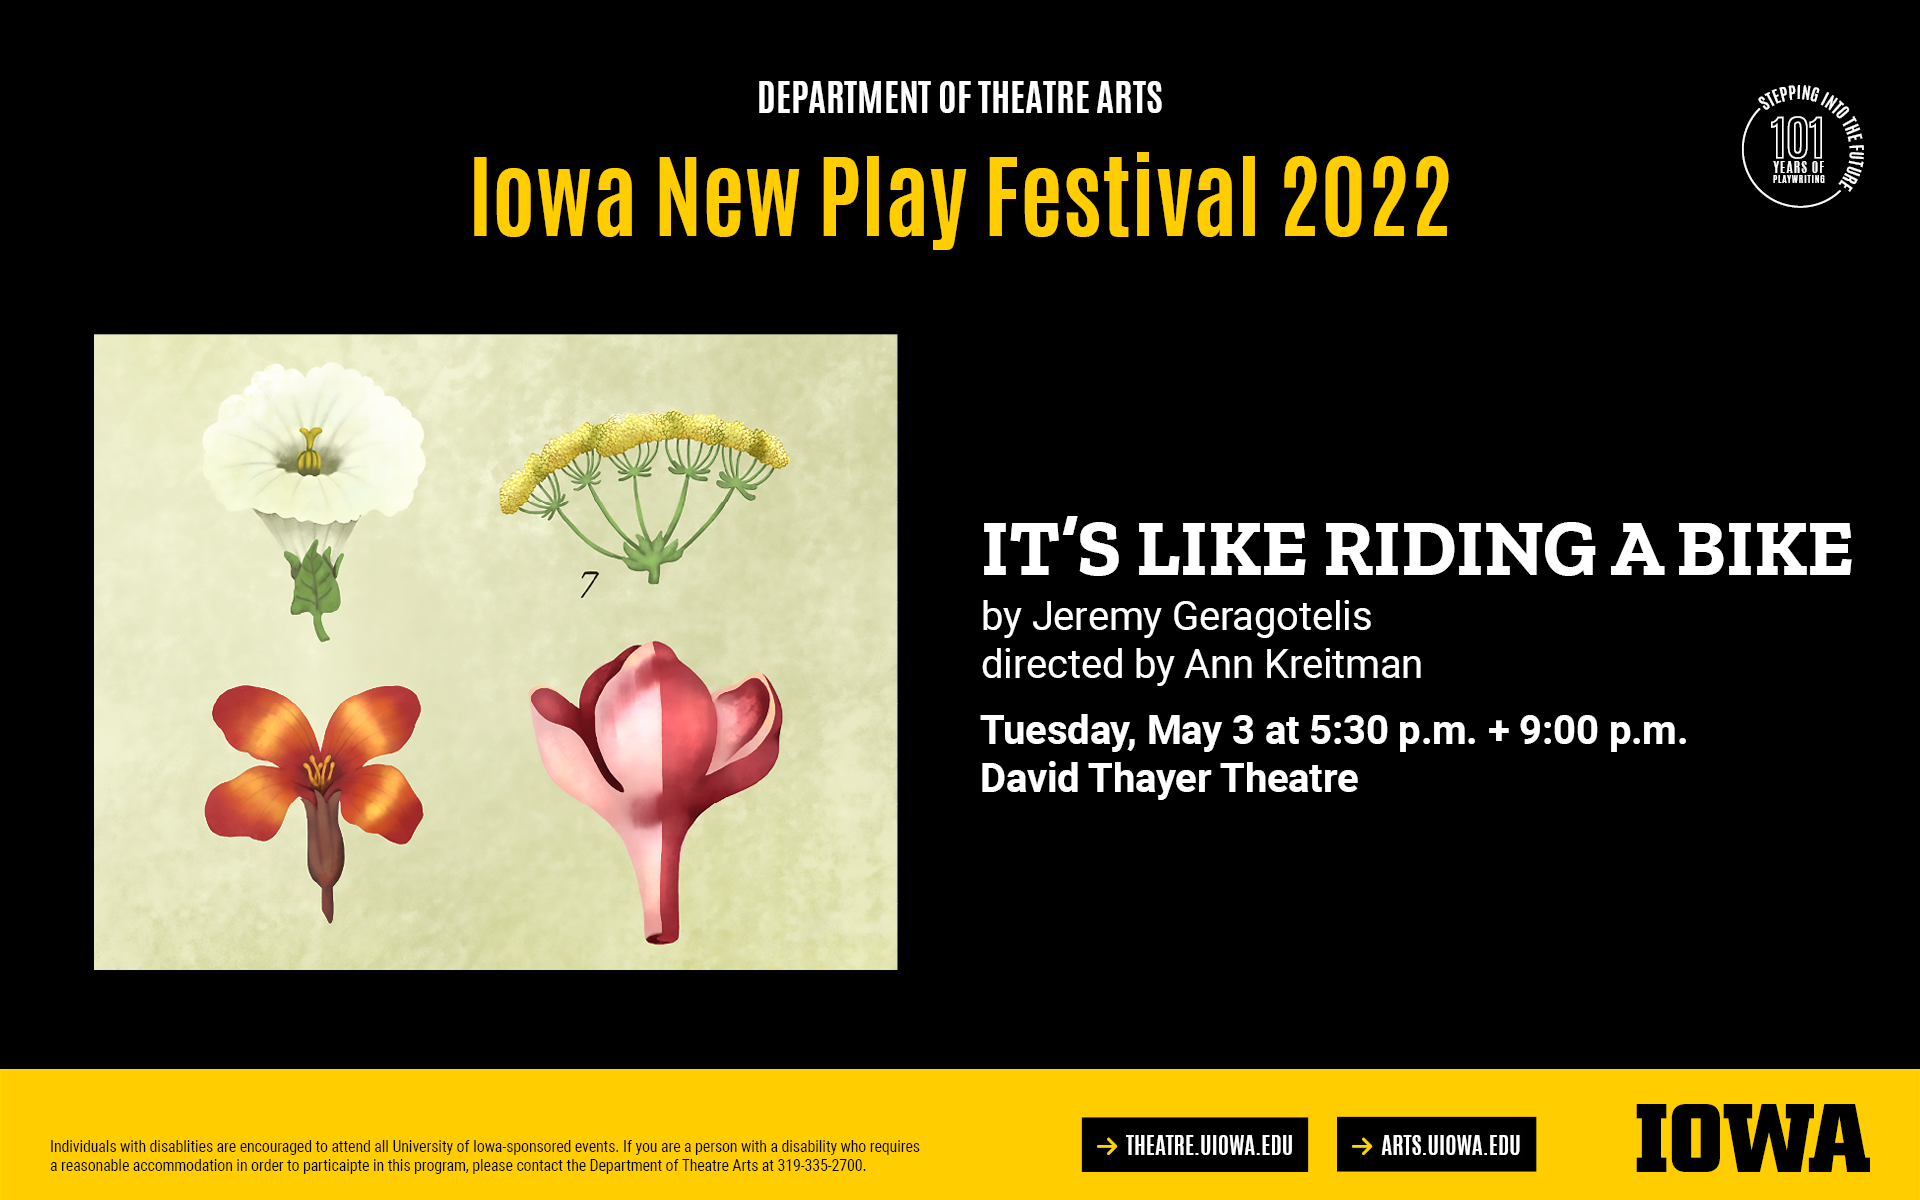 Iowa New Play Festival. IT'S LIKE RIDING A BIKE. By Jeremy Geragotelis, directed by Ann Kreitman. Tuesday, May 3 at 5:30PM and 9PM, David Thayer Theatre. Individuals with disablities are encouraged to attend all University of Iowa-sponsored events. If you are a person with a disability who requires  a reasonable accommodation in order to particaipte in this program, please contact the Department of Theatre Arts at 319-335-2700.